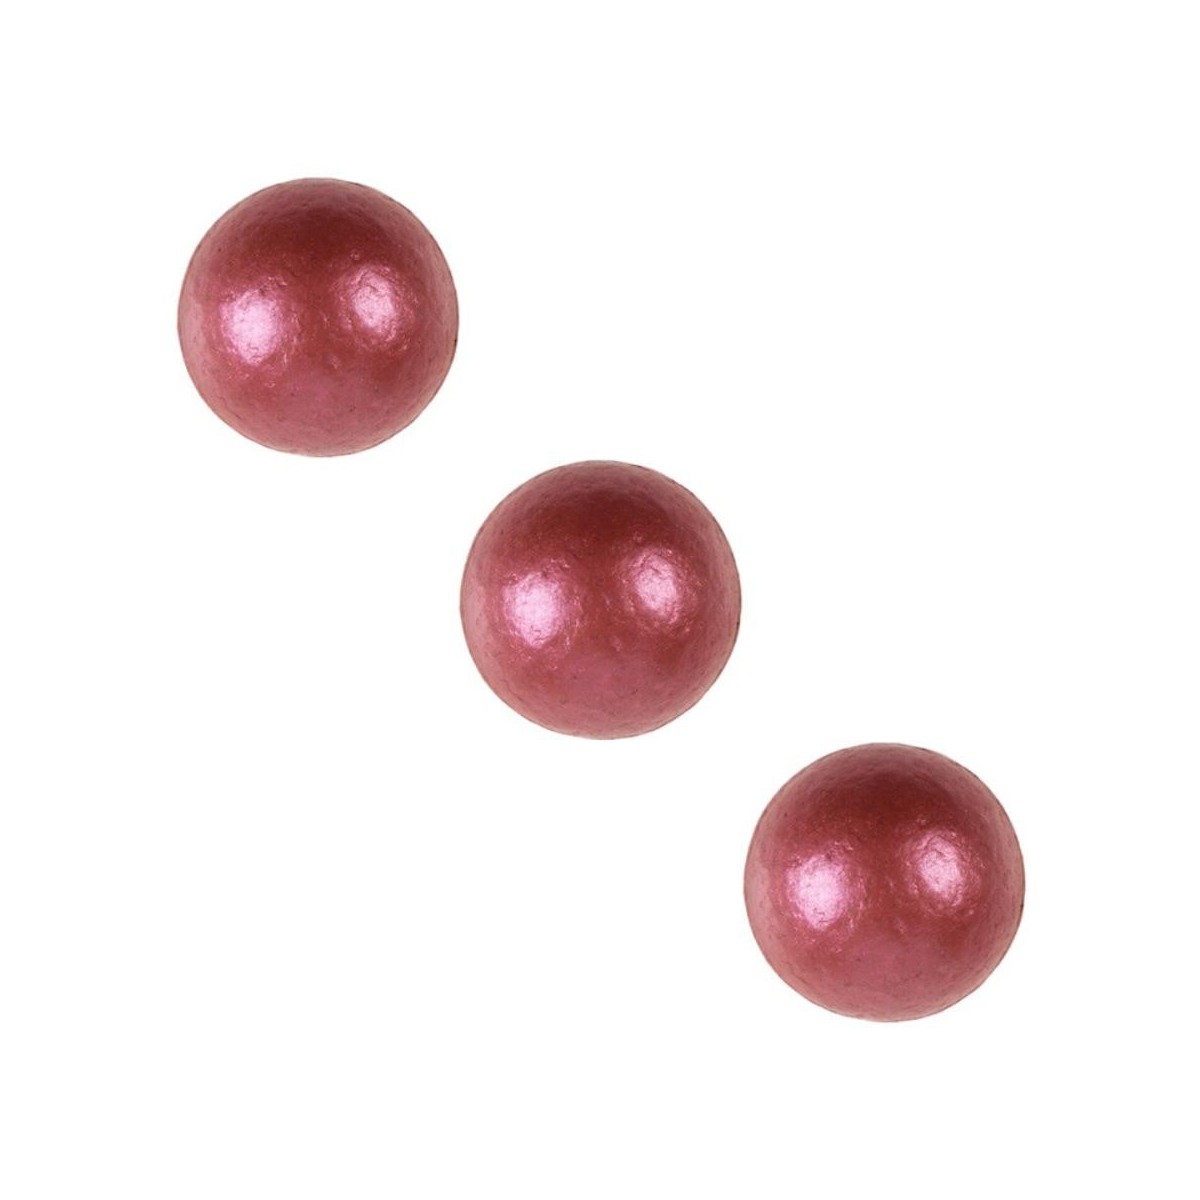 32945 BOULE RED PEARLY  Ø 2,2CM 162 PCESS/CD